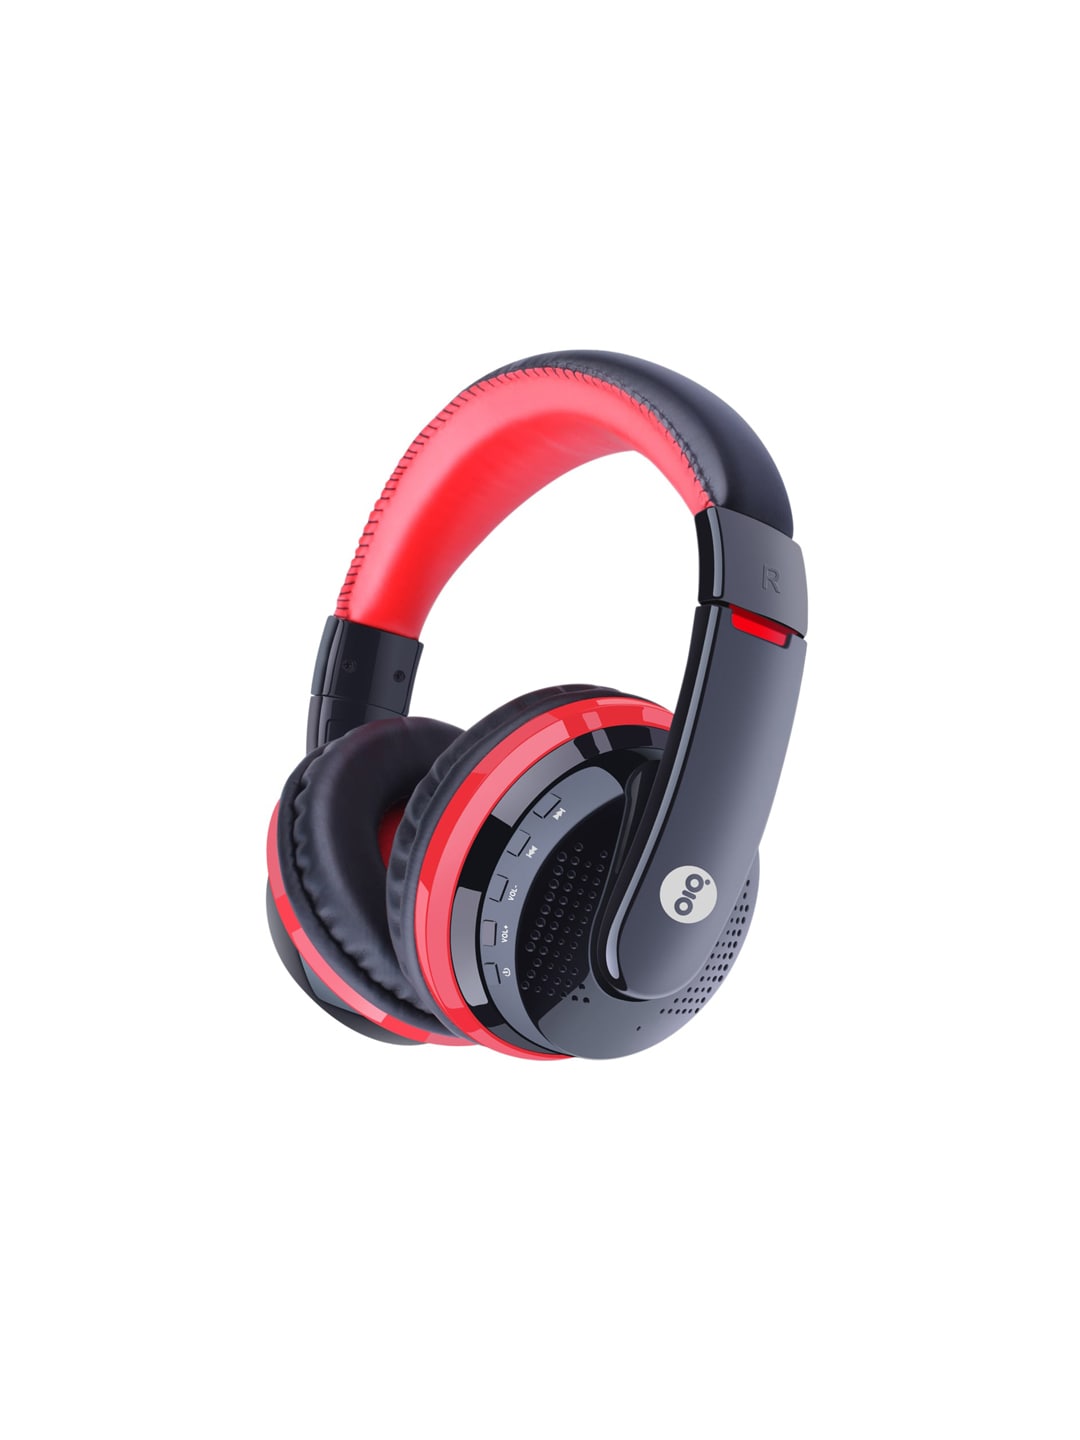 GIZMORE Black & Red Dual Tone Over-Ear Wireless Headphones Giz MH411 Price in India